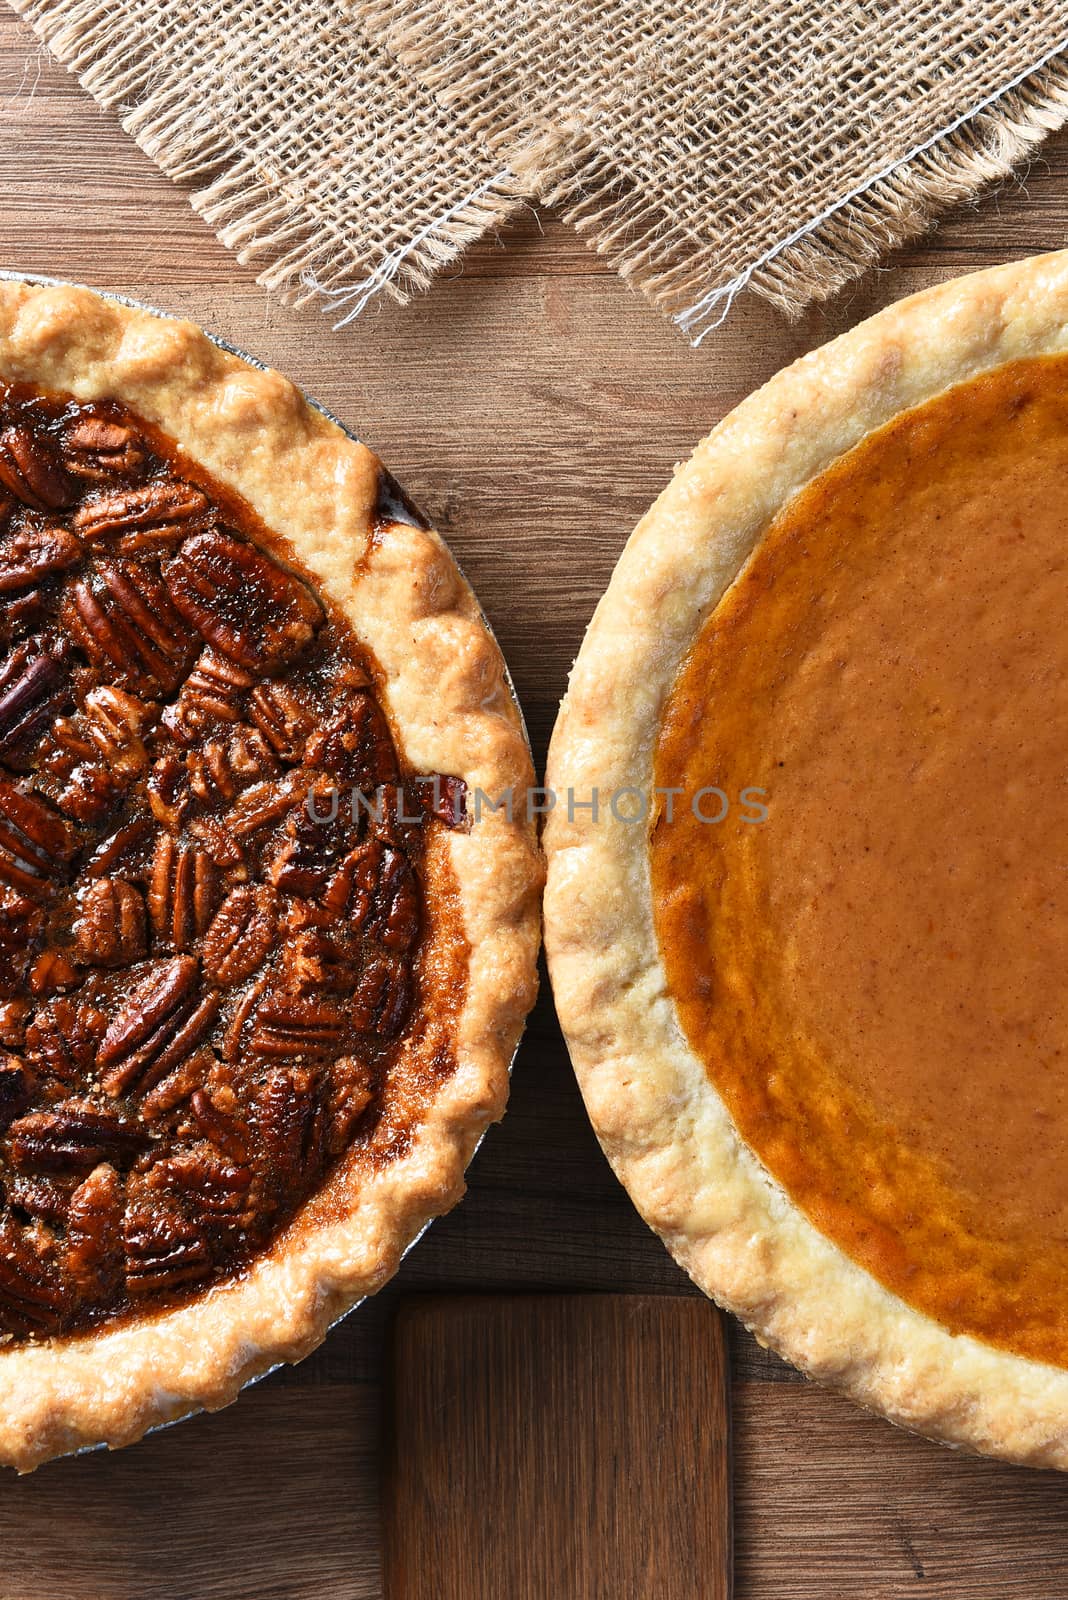 Two pies on a Thanksgiving holiday table. Pumpkin and pecan pies are traditional desserts for the American holiday.